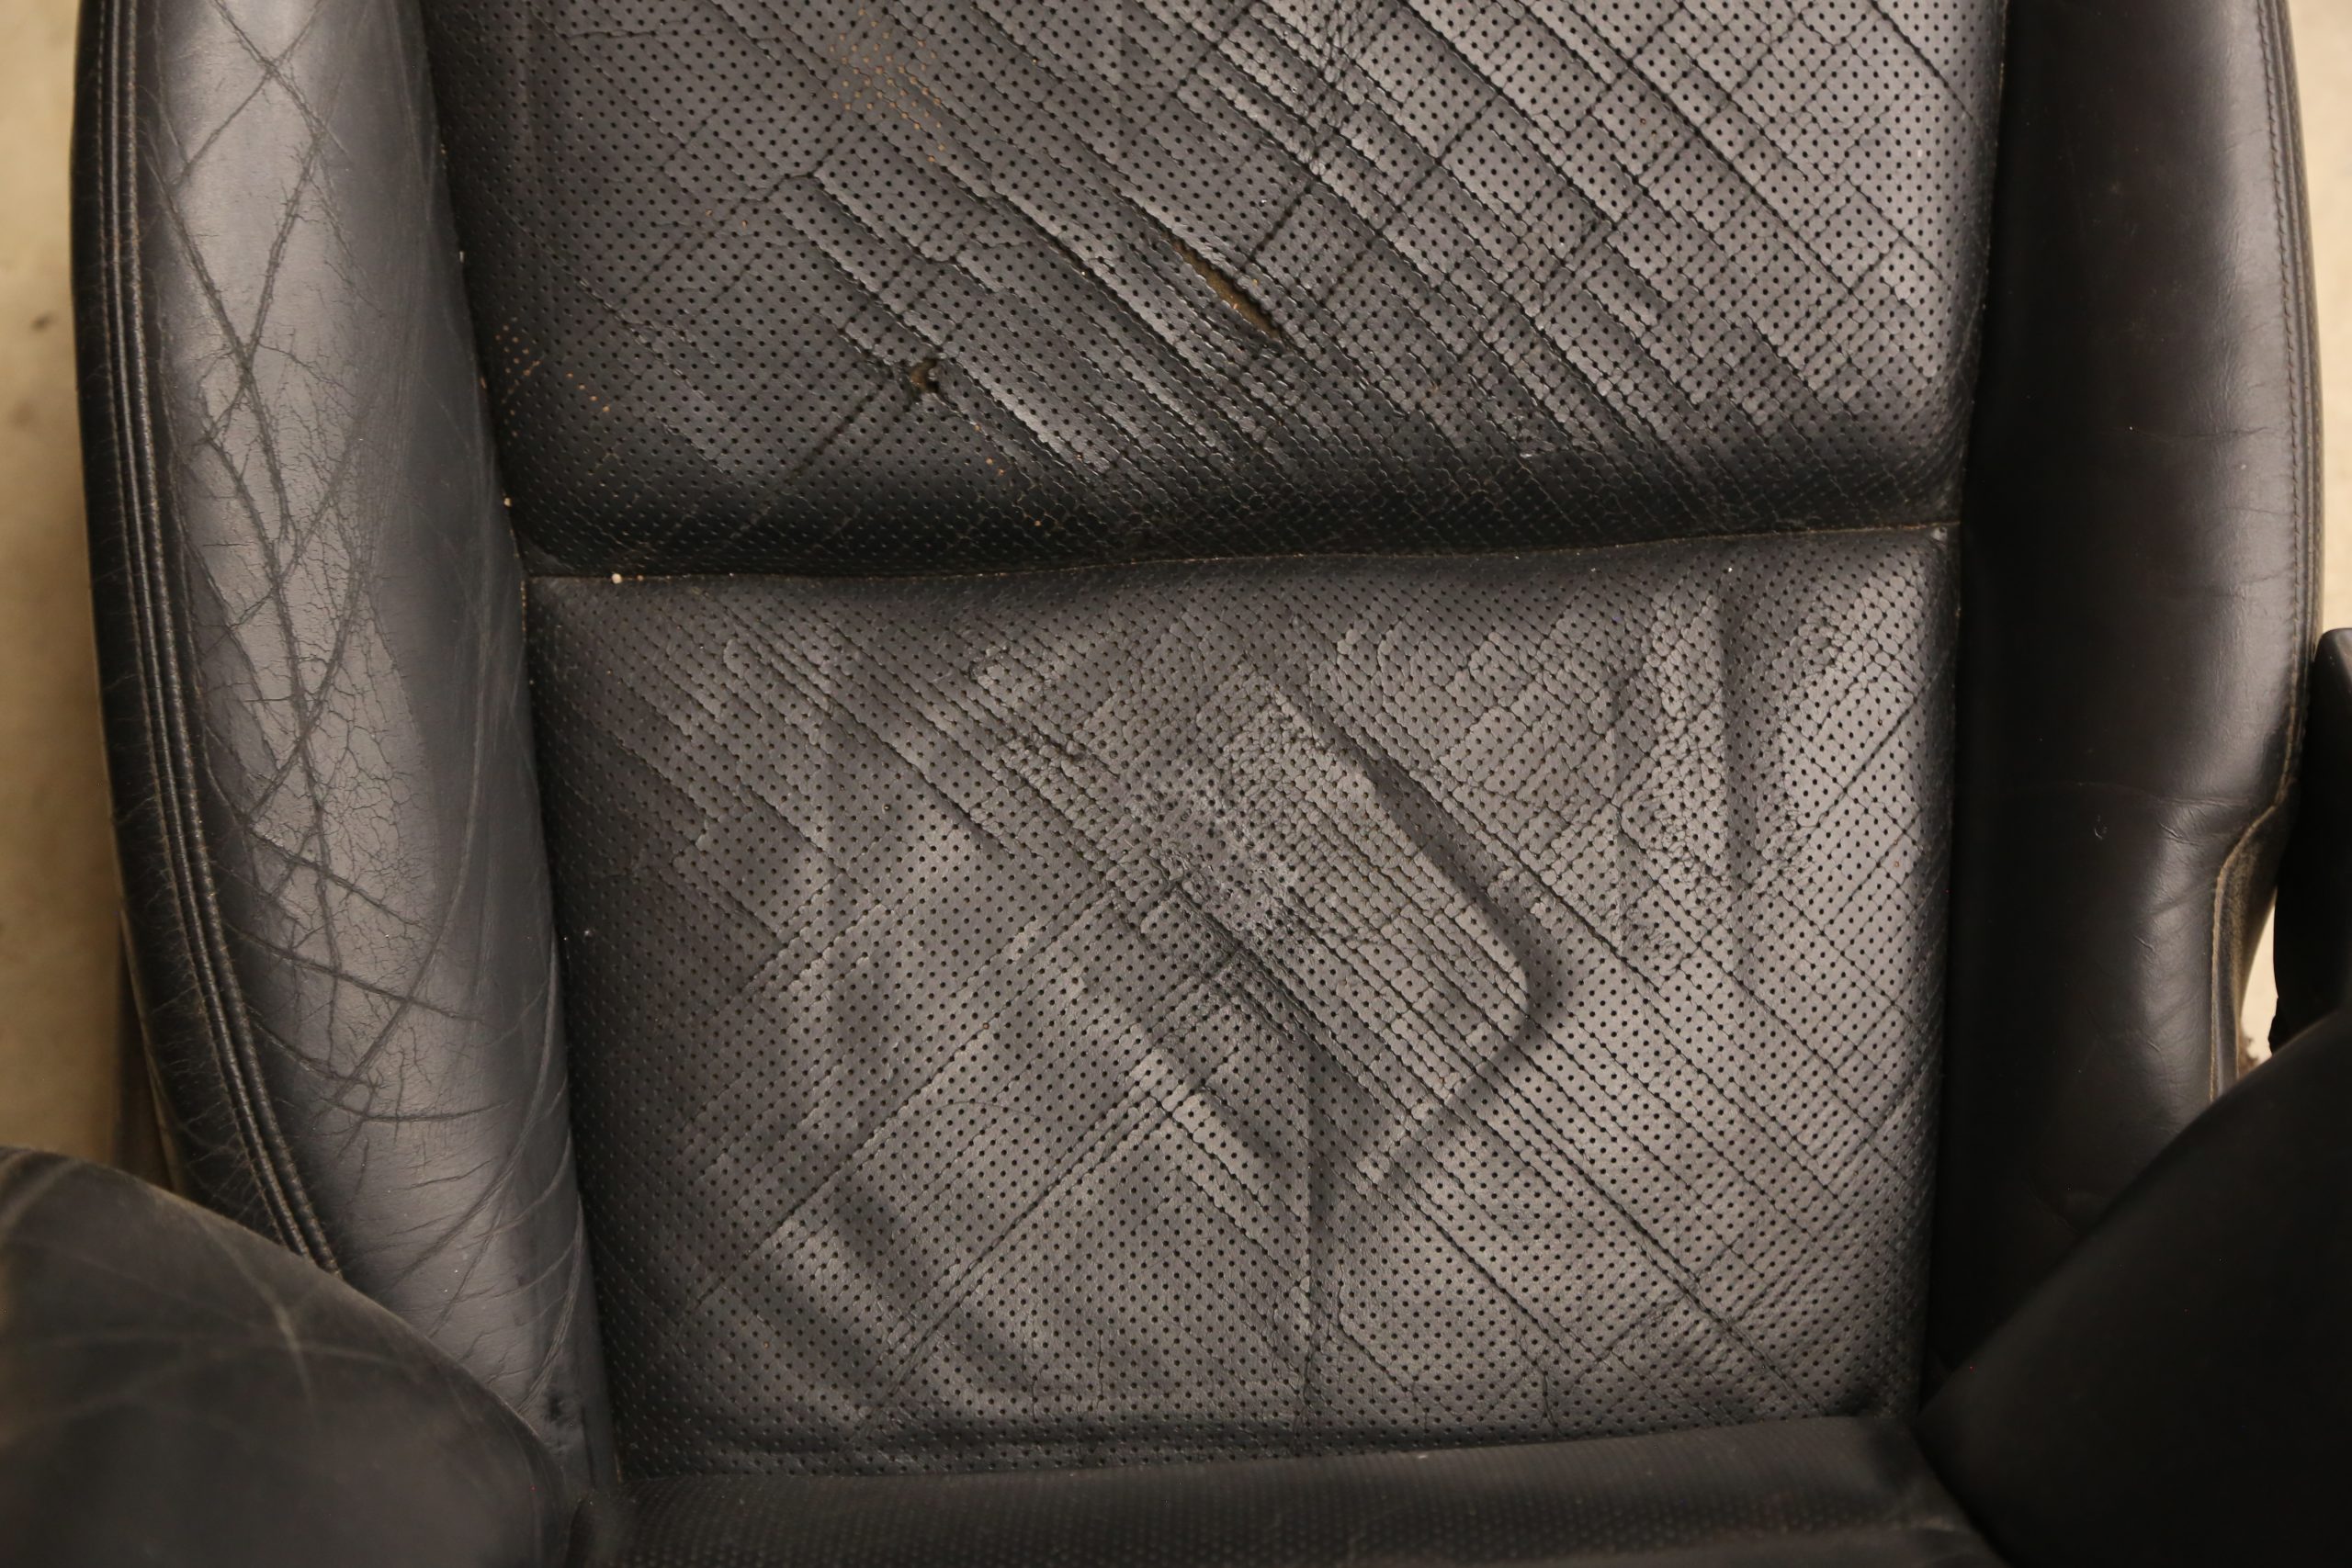 How to Repair Tears in Your Car's Vinyl Seats